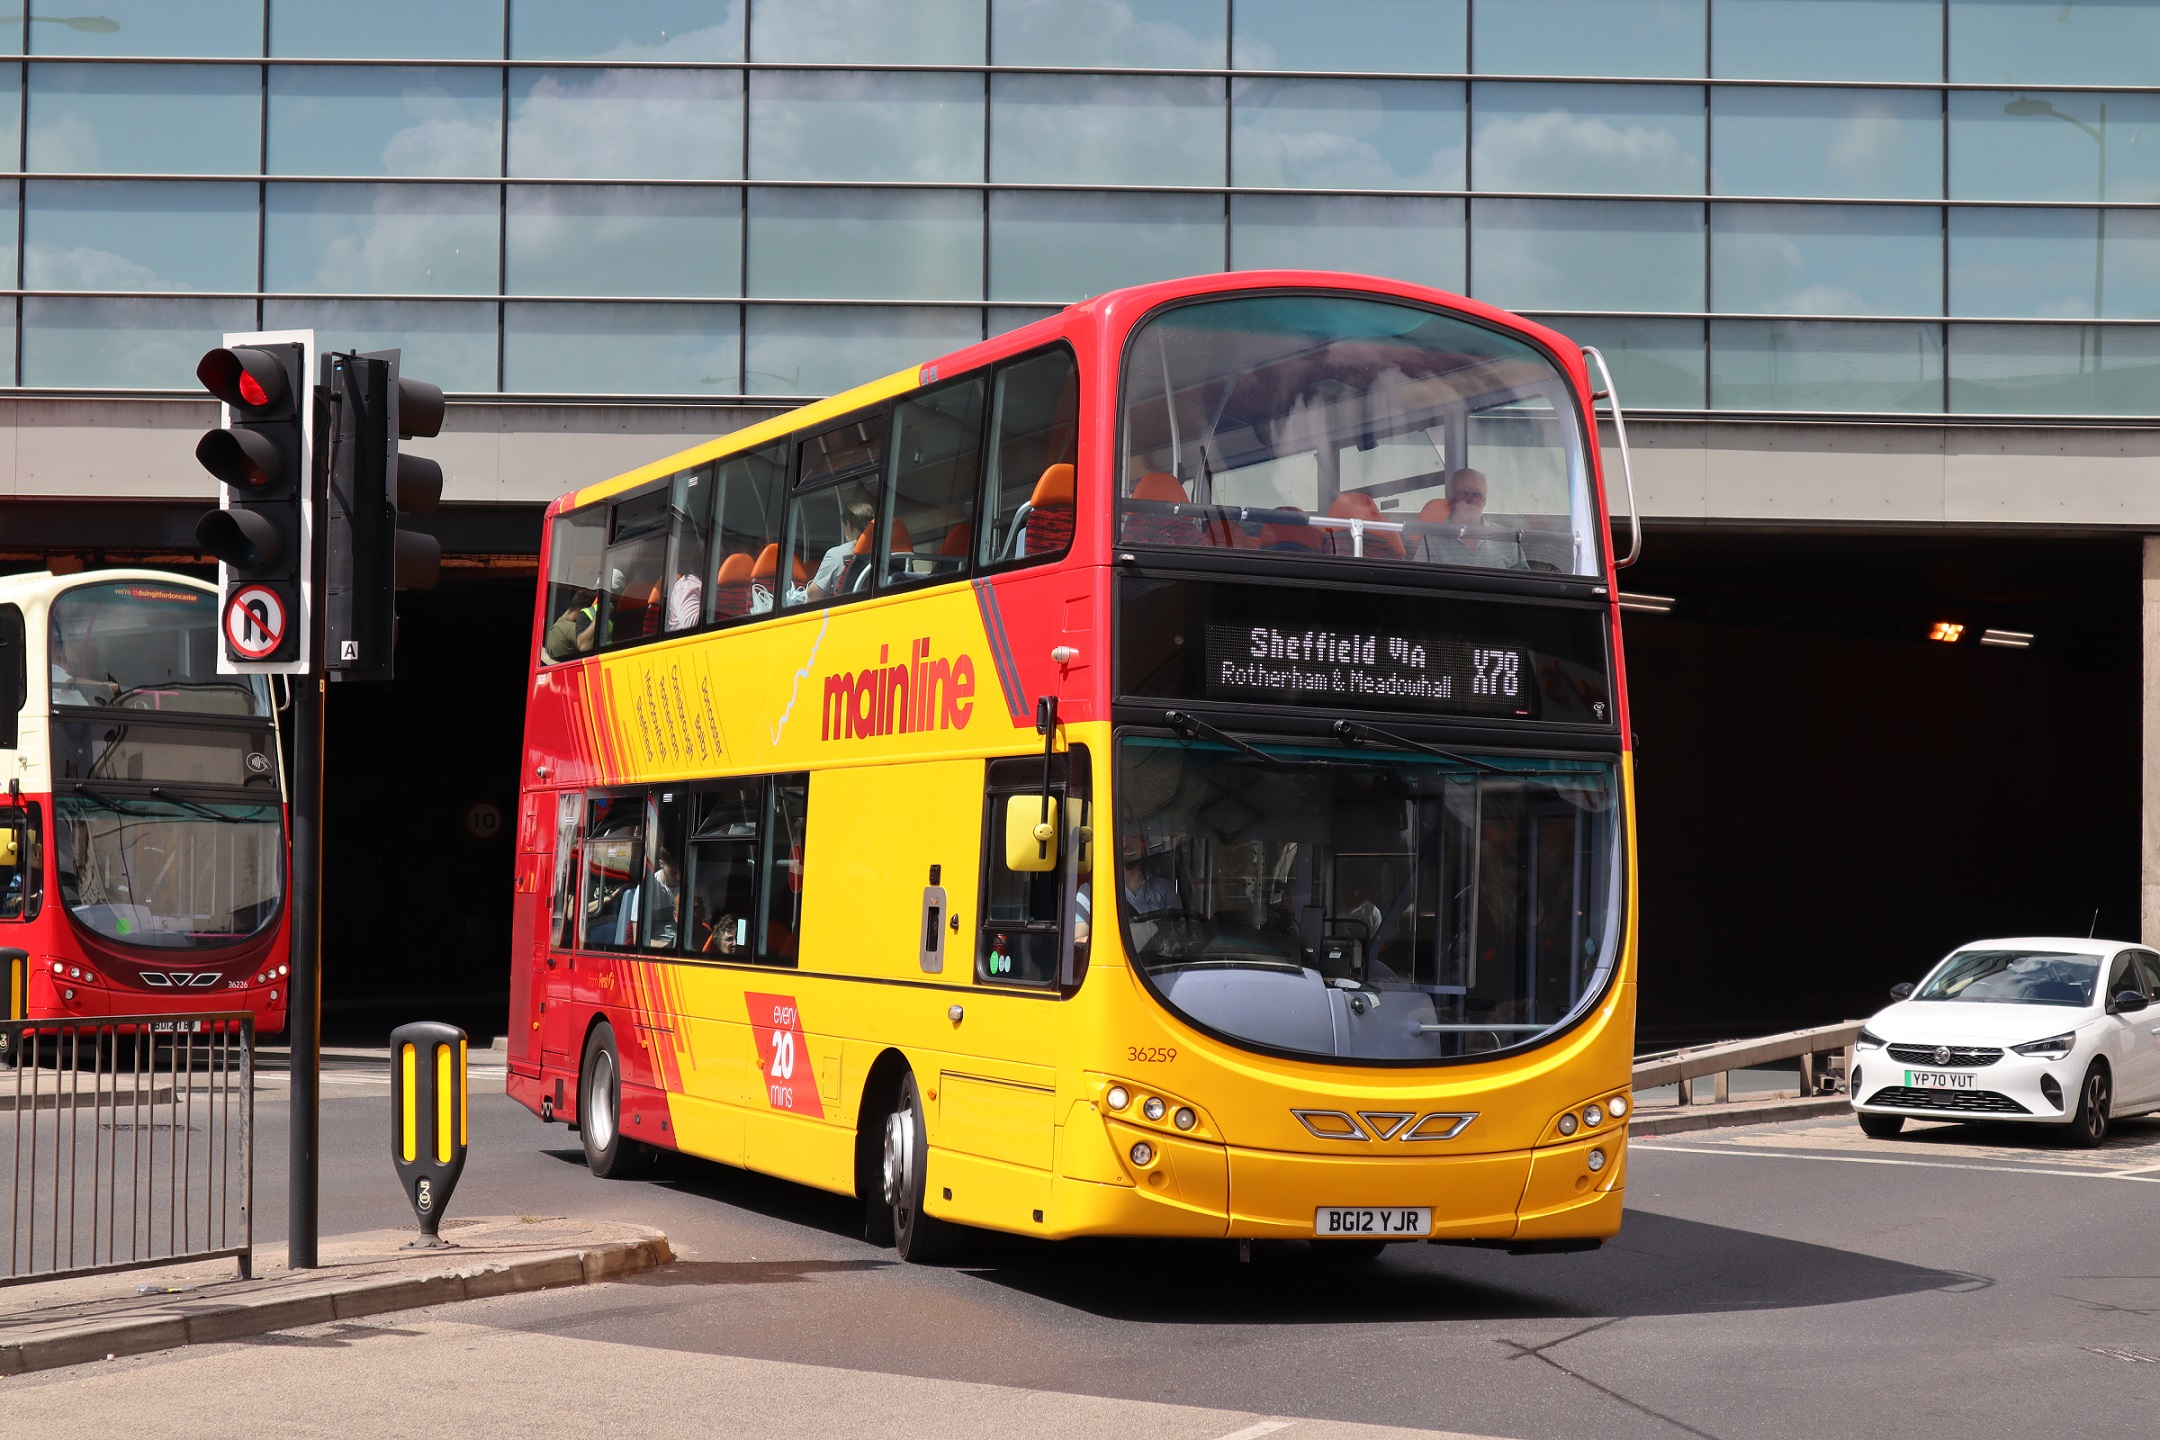 Bus revenue funding crisis in England and Wales worsens